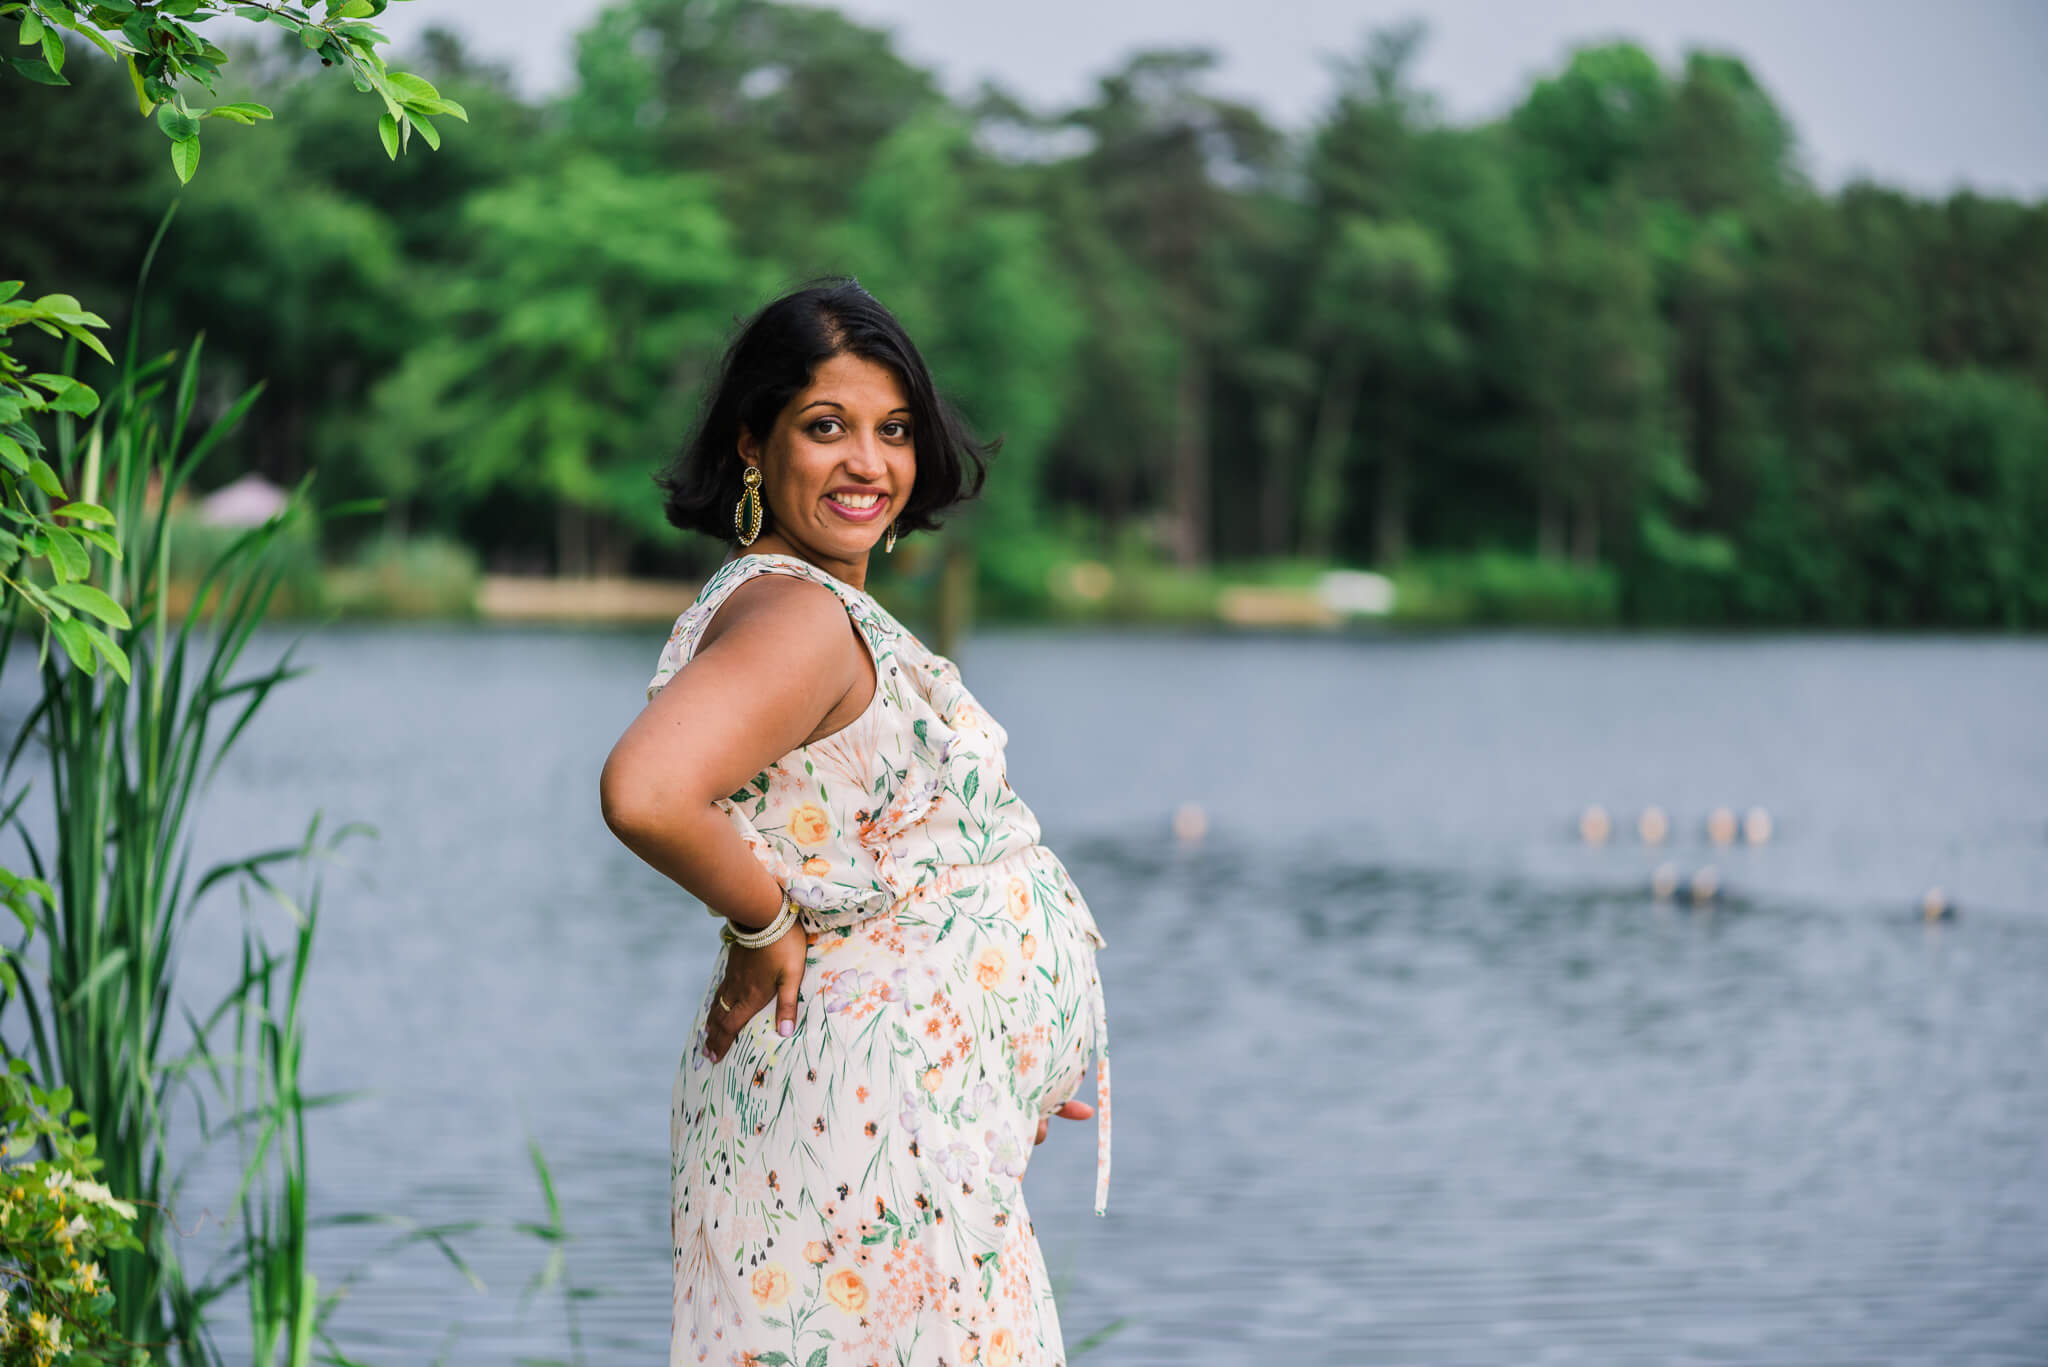 A mom to be in a white floral dress stands by a lake holding her bump in a park after meeting with center for midwifery